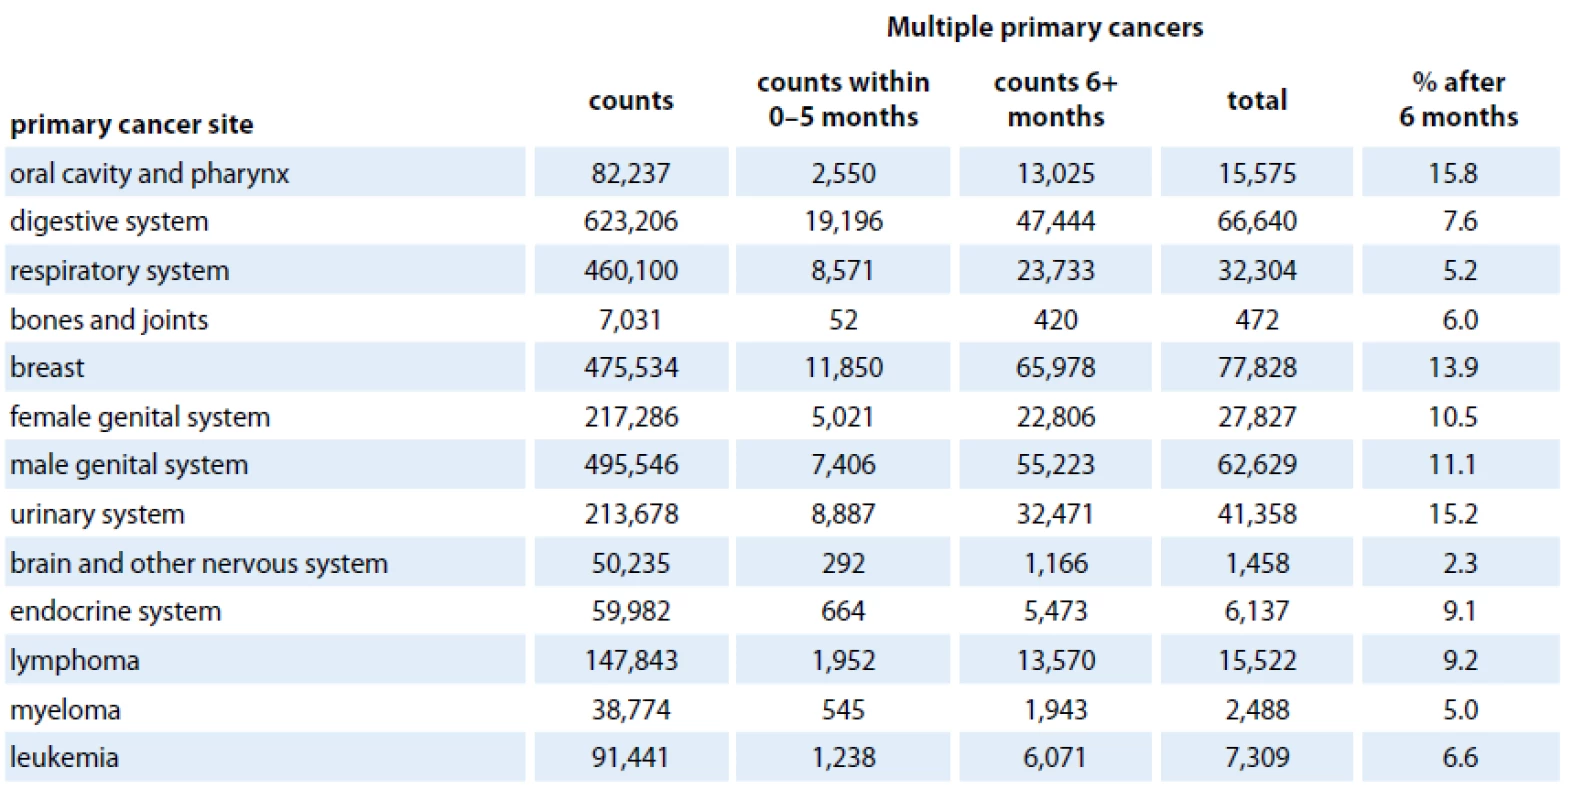 Selected primary cancer sites with multiple primary cancers from Surveillance, Epidemiology, and End Results (SEER – 9 areas), 1973–2009.